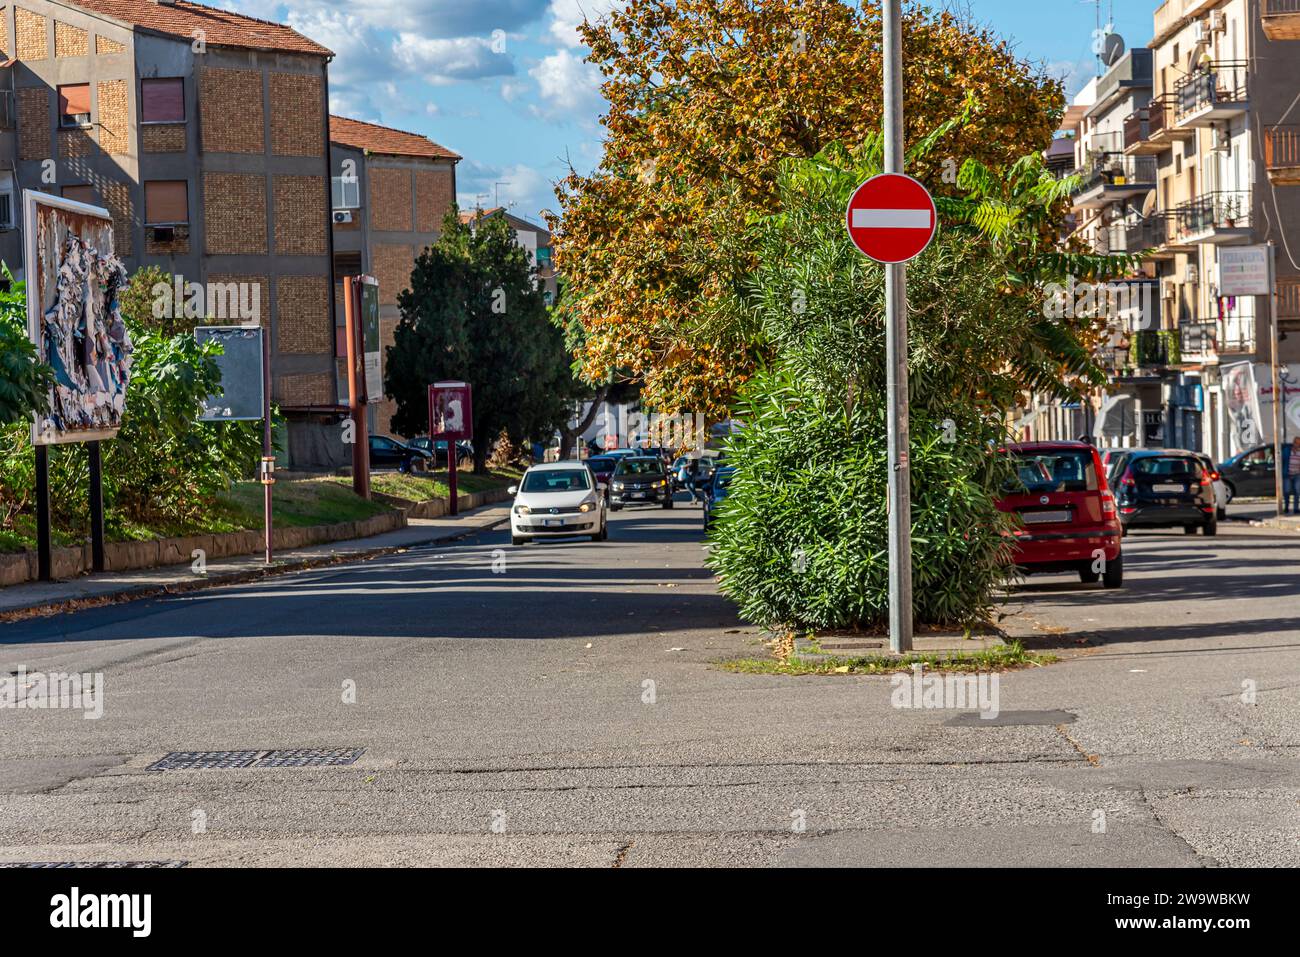 Tree-lined avenue with car traffic and no entry sign Stock Photo